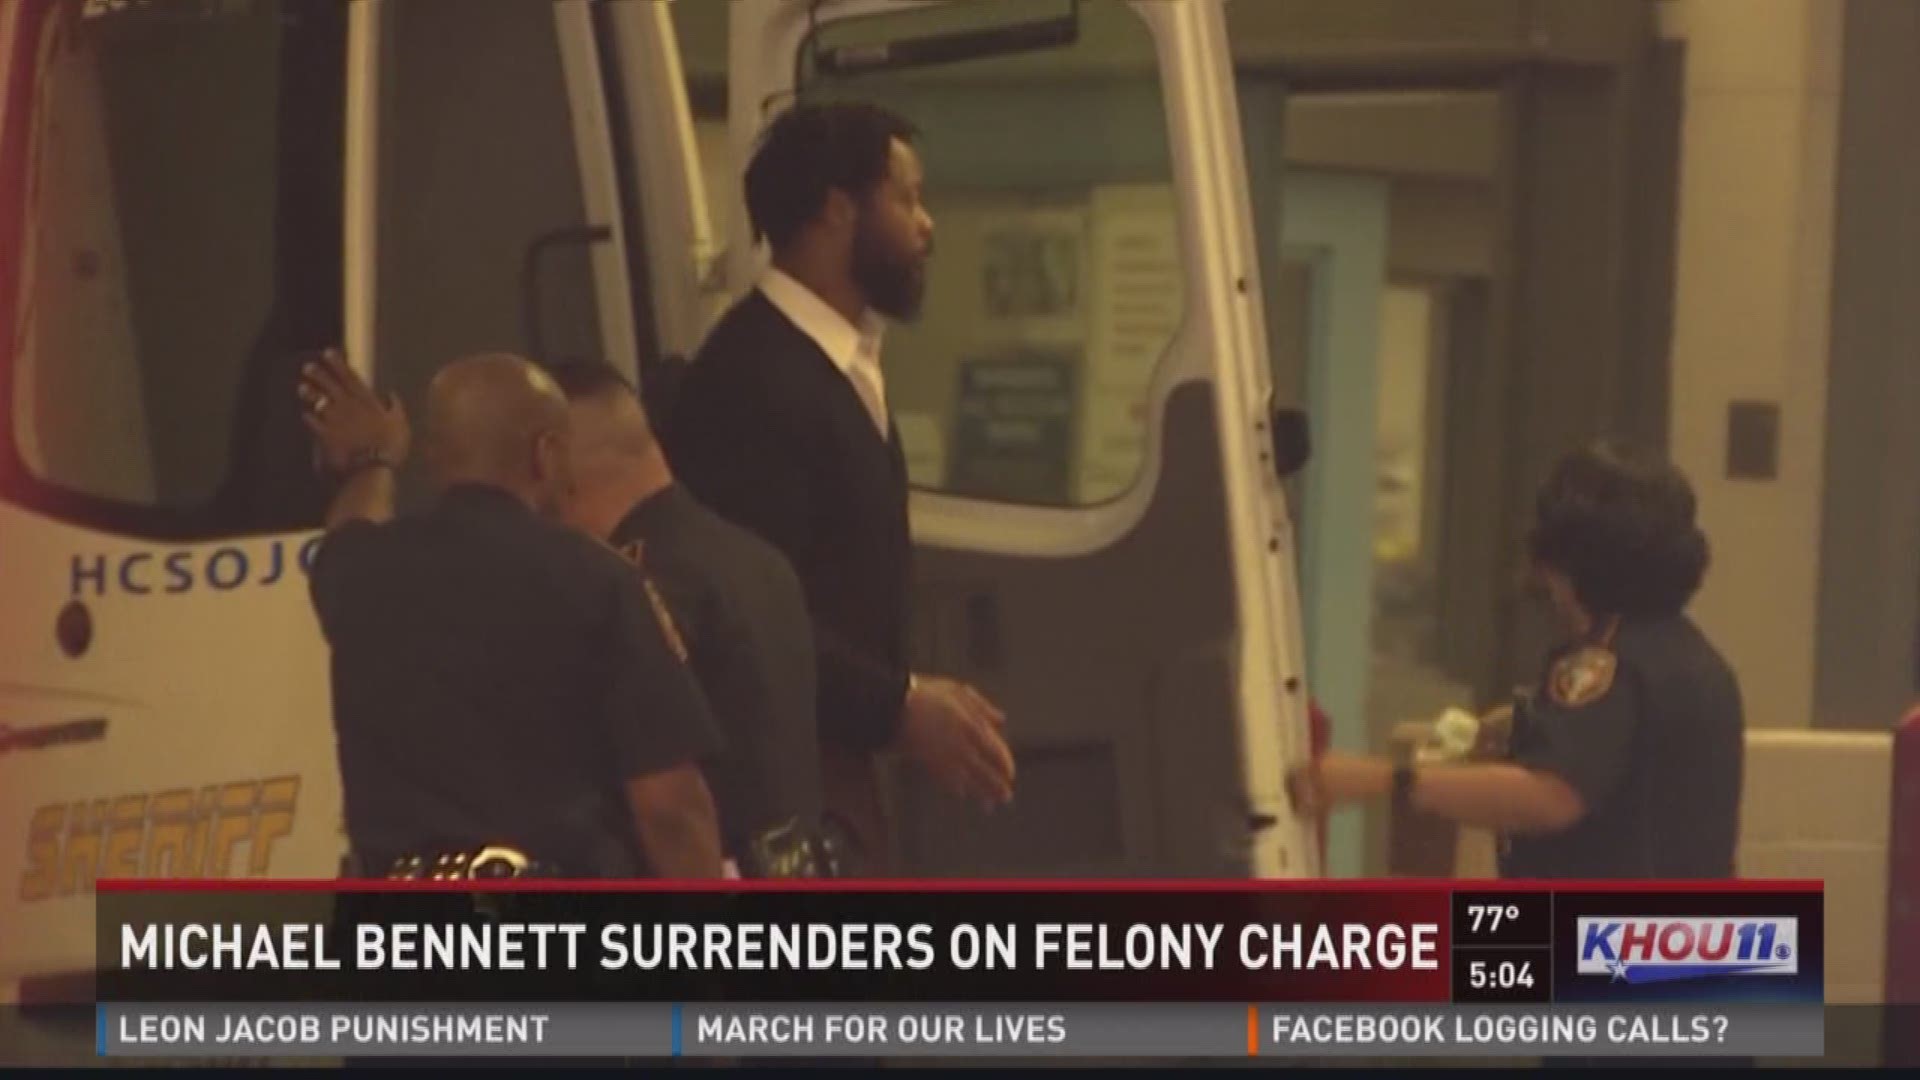 Philadelphia Eagles defensive lineman Michael Bennett surrendered Monday to face a charge that he assaulted a 66-year-old paraplegic woman at Super Bowl LI at NRG Stadium last year. Bennett is accused of shoving the security staff worker while trying to g